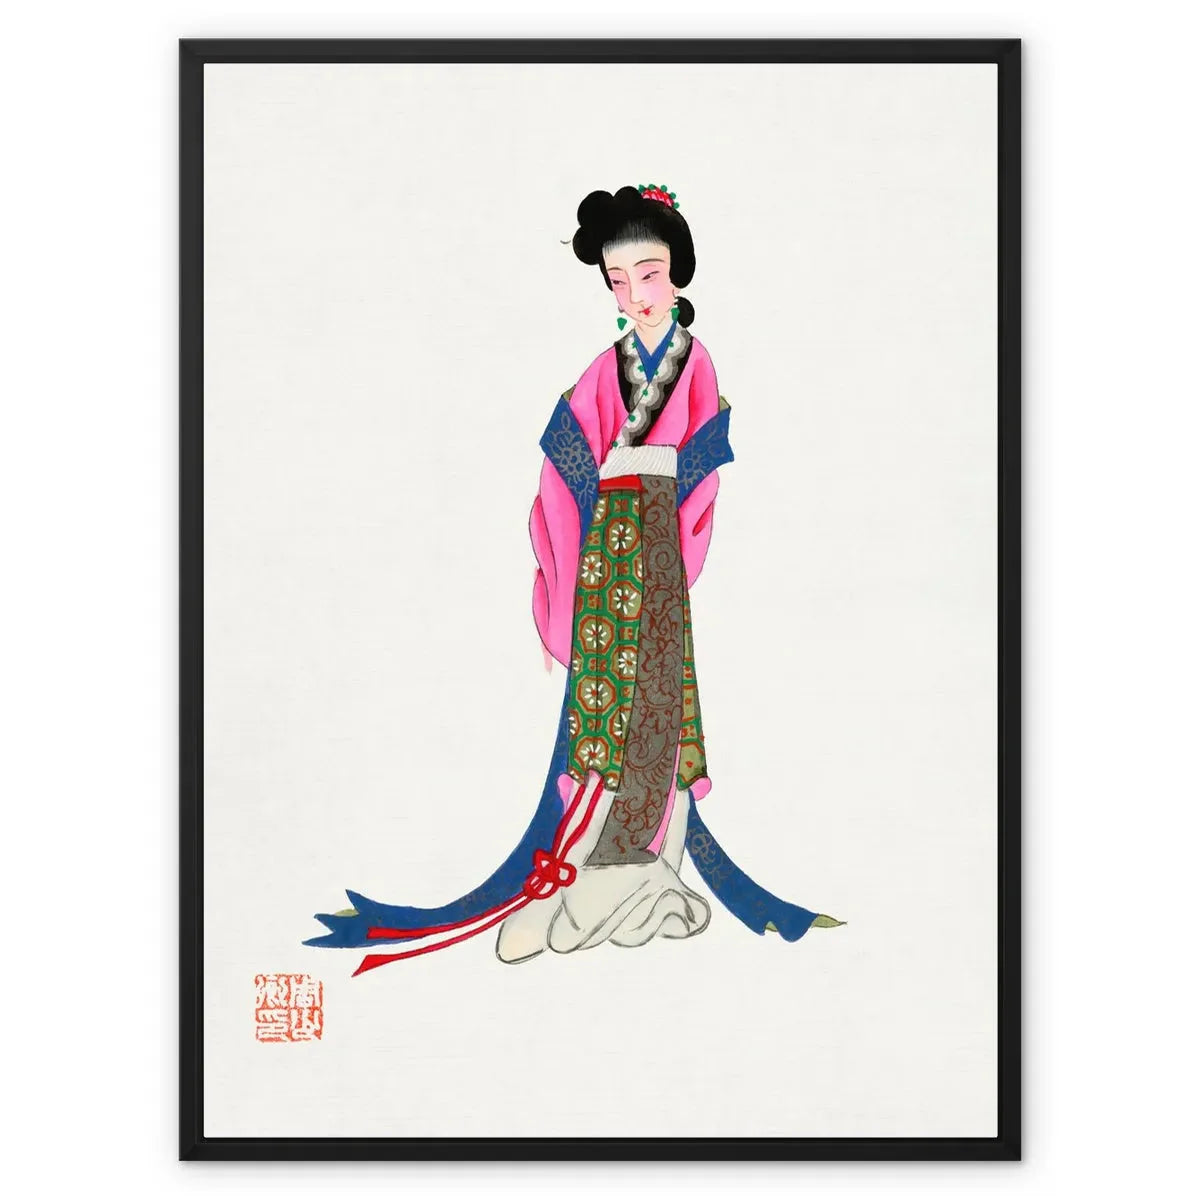 Chinese Noblewoman Framed Canvas - 24’x32’ - Posters Prints & Visual Artwork - Aesthetic Art